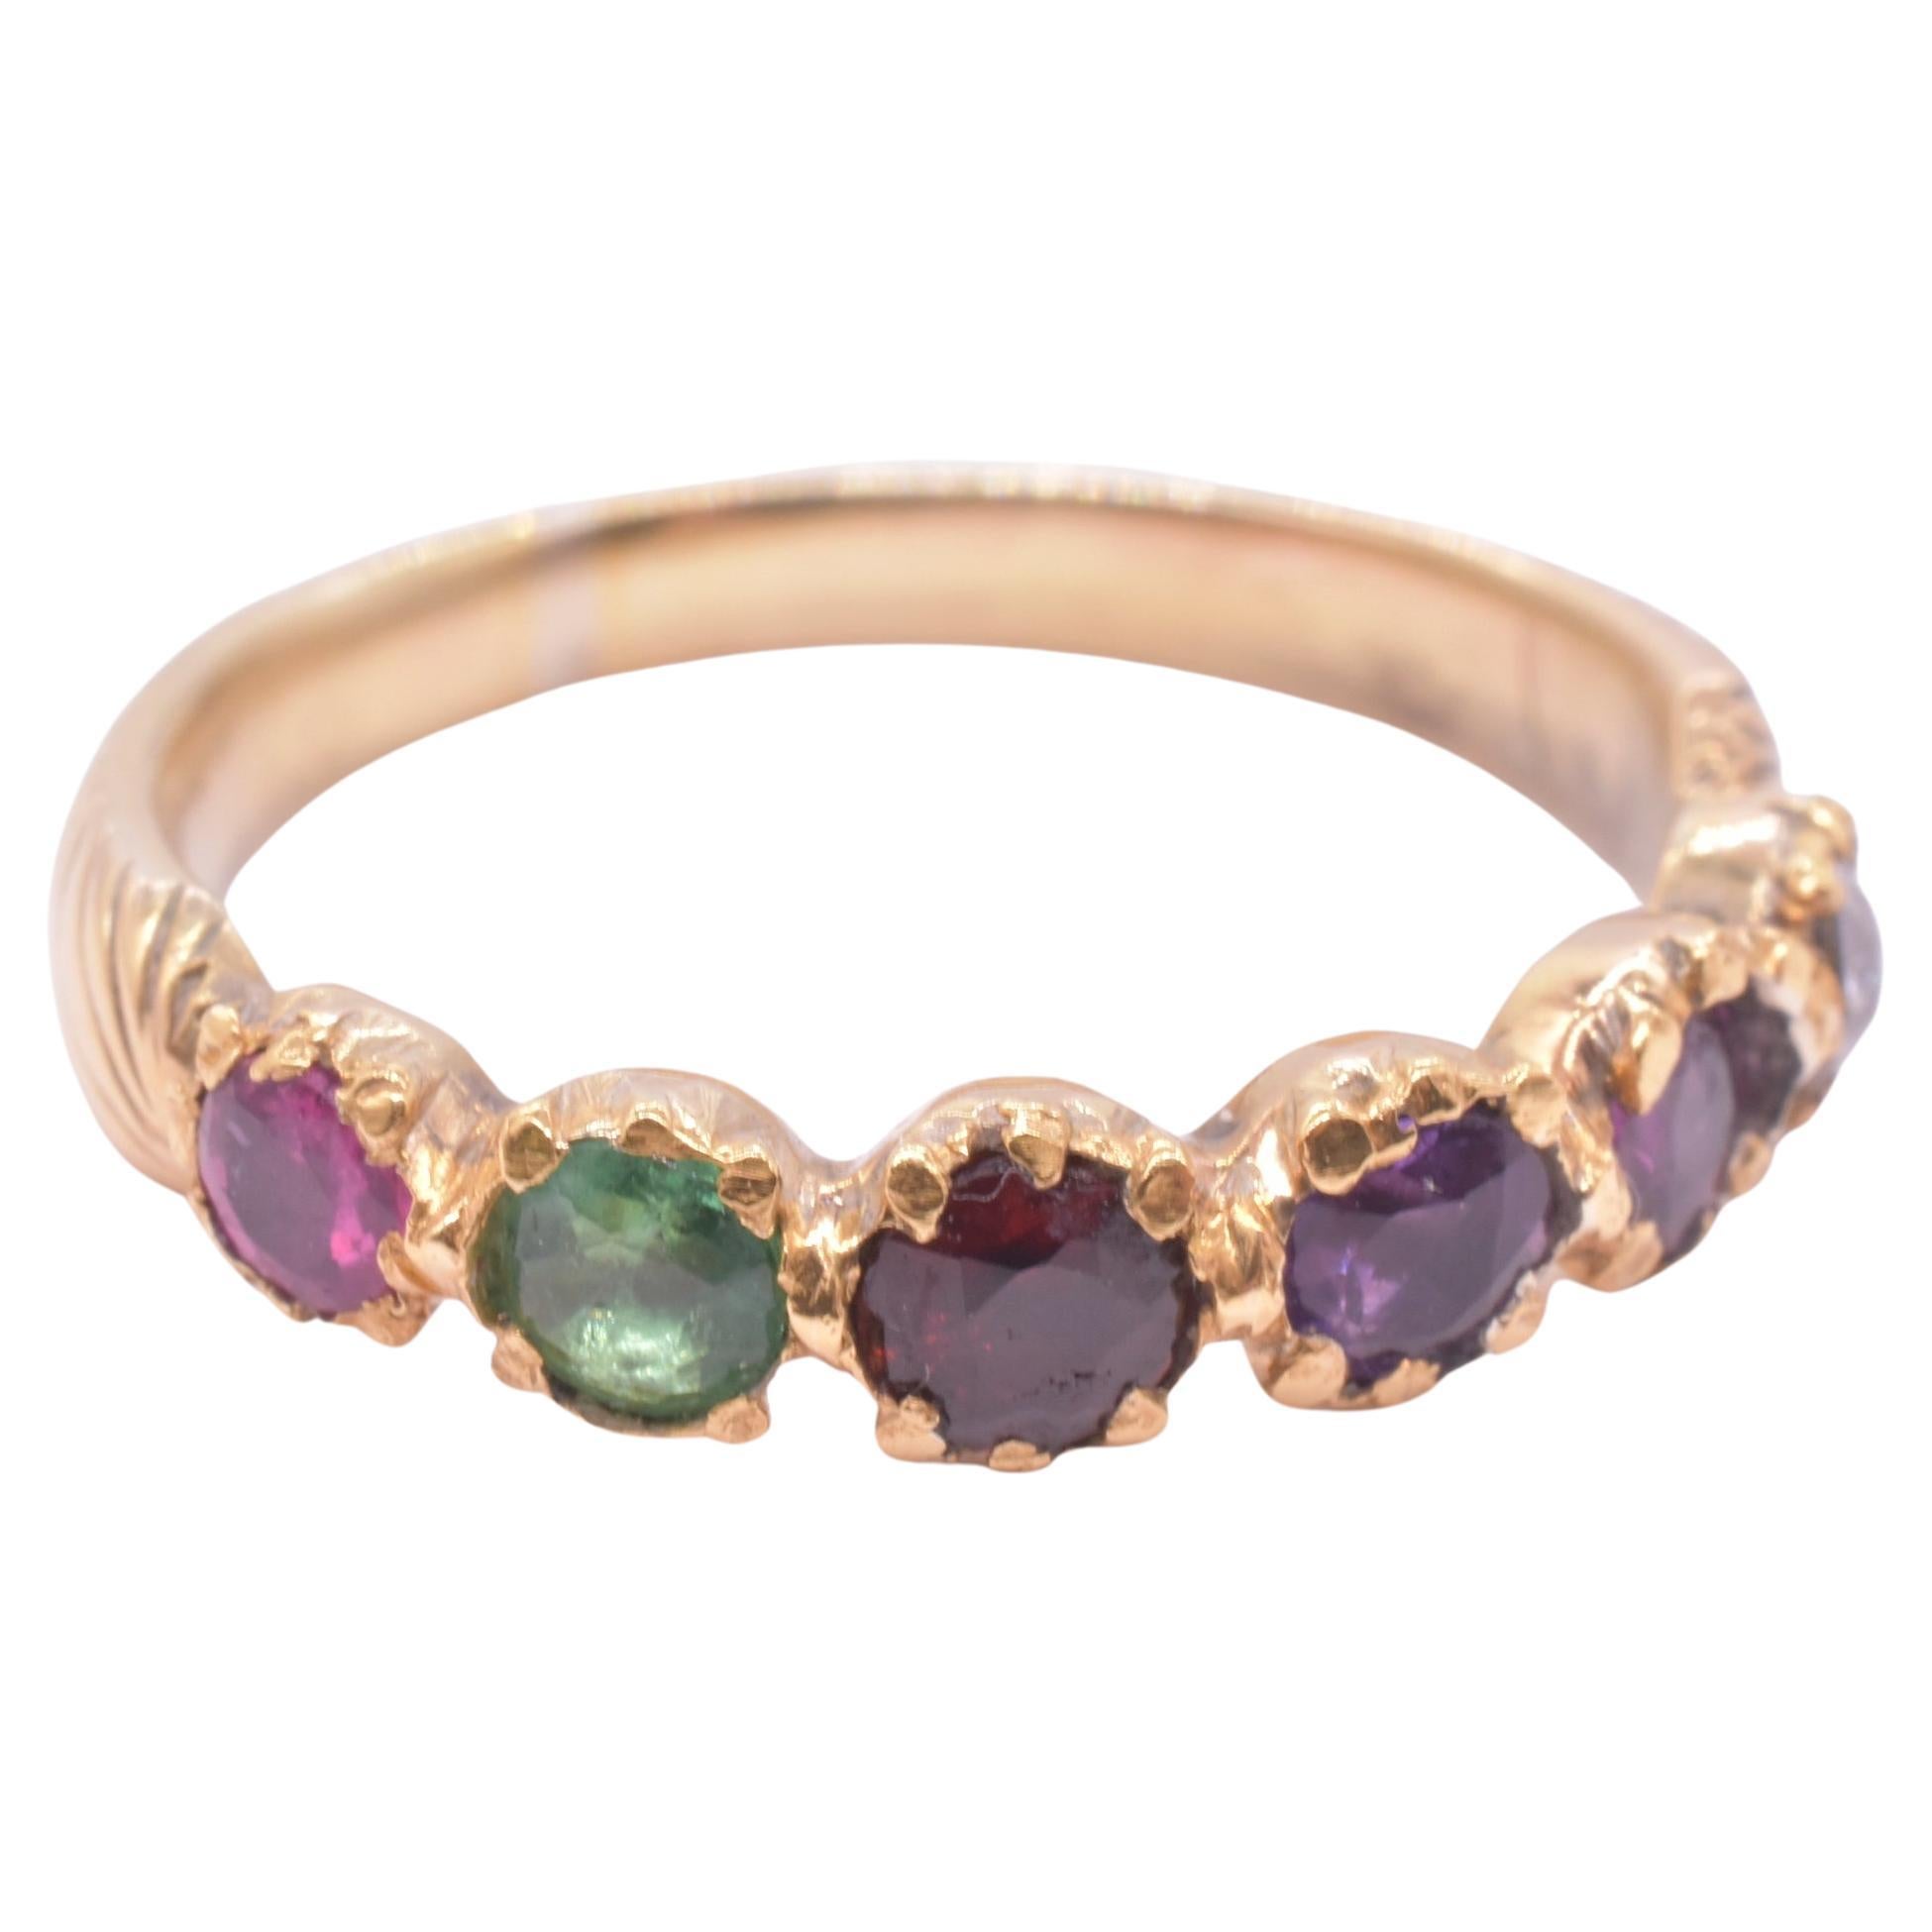 Our 18K Victorian Regard ring is a romantic  acrostic ring set in a linear formation, with six gemstones in which the initial letter of each spells the word 'Regard': Ruby, Emerald, Garnet, Amethyst, Ruby, and Diamond. 

The 18K band is delicately